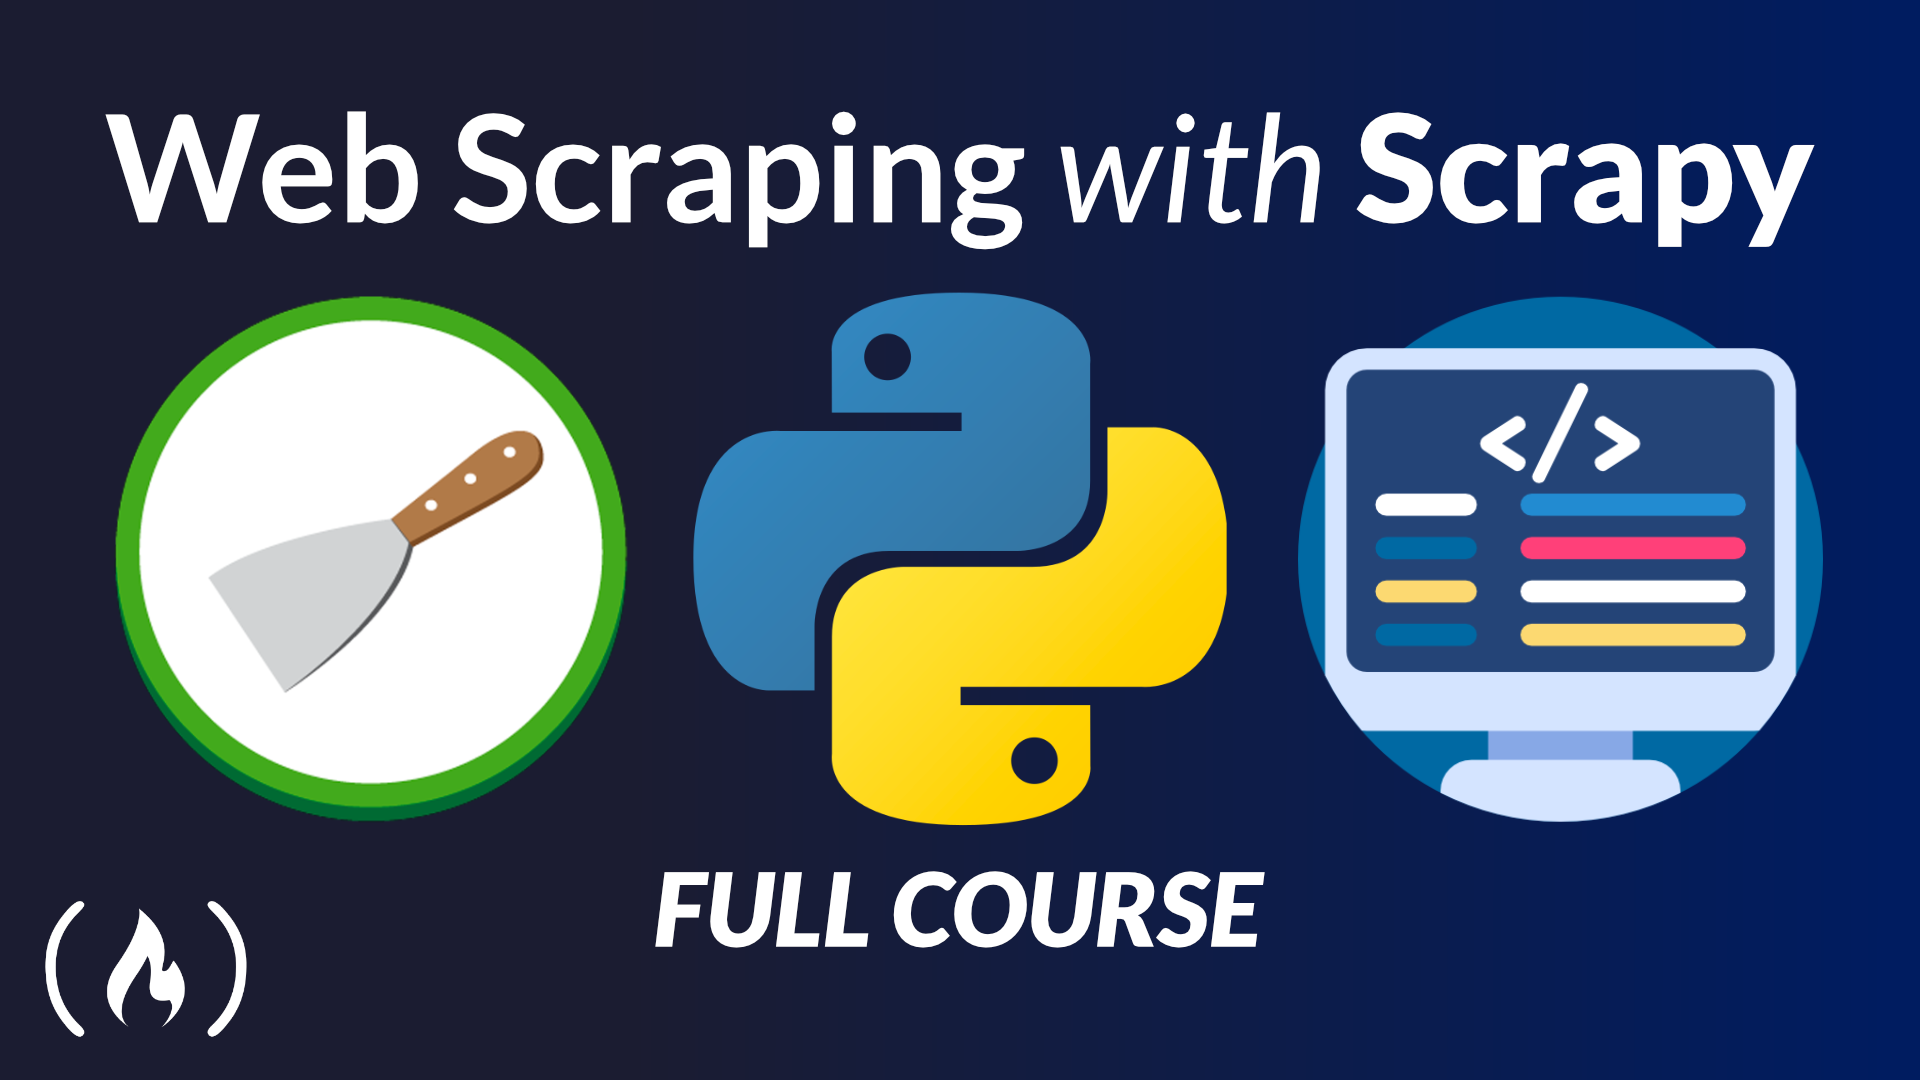 Use Scrapy for Web Scraping in Python